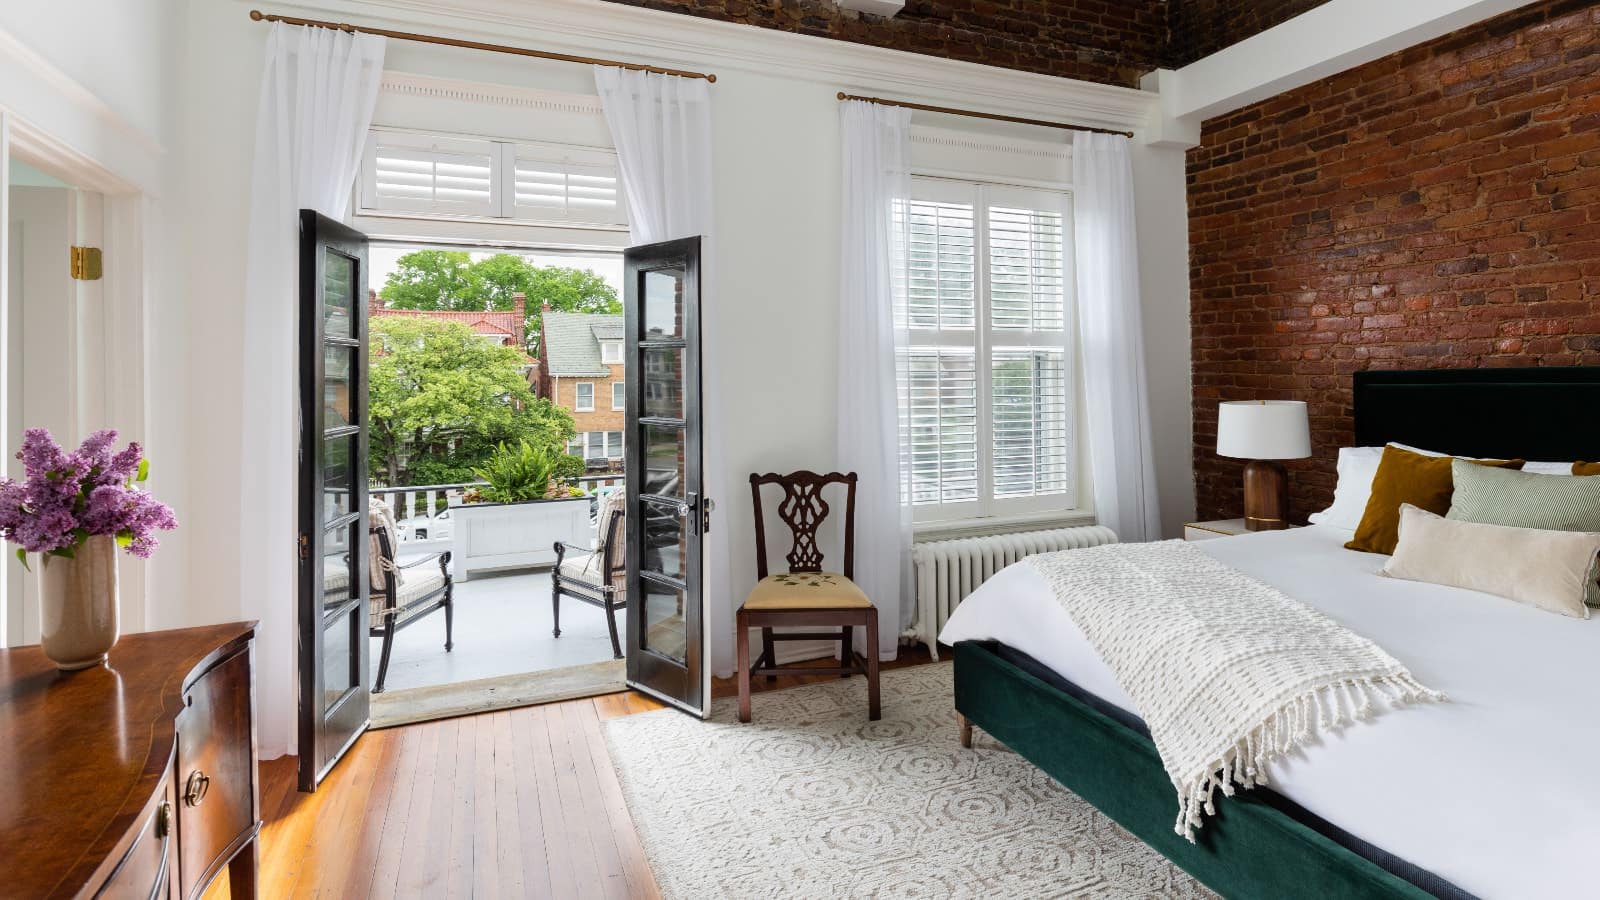 Bedroom with white walls and red brick accent wall behind bed with white bedding, hardwood flooring, and open double doors to balcony